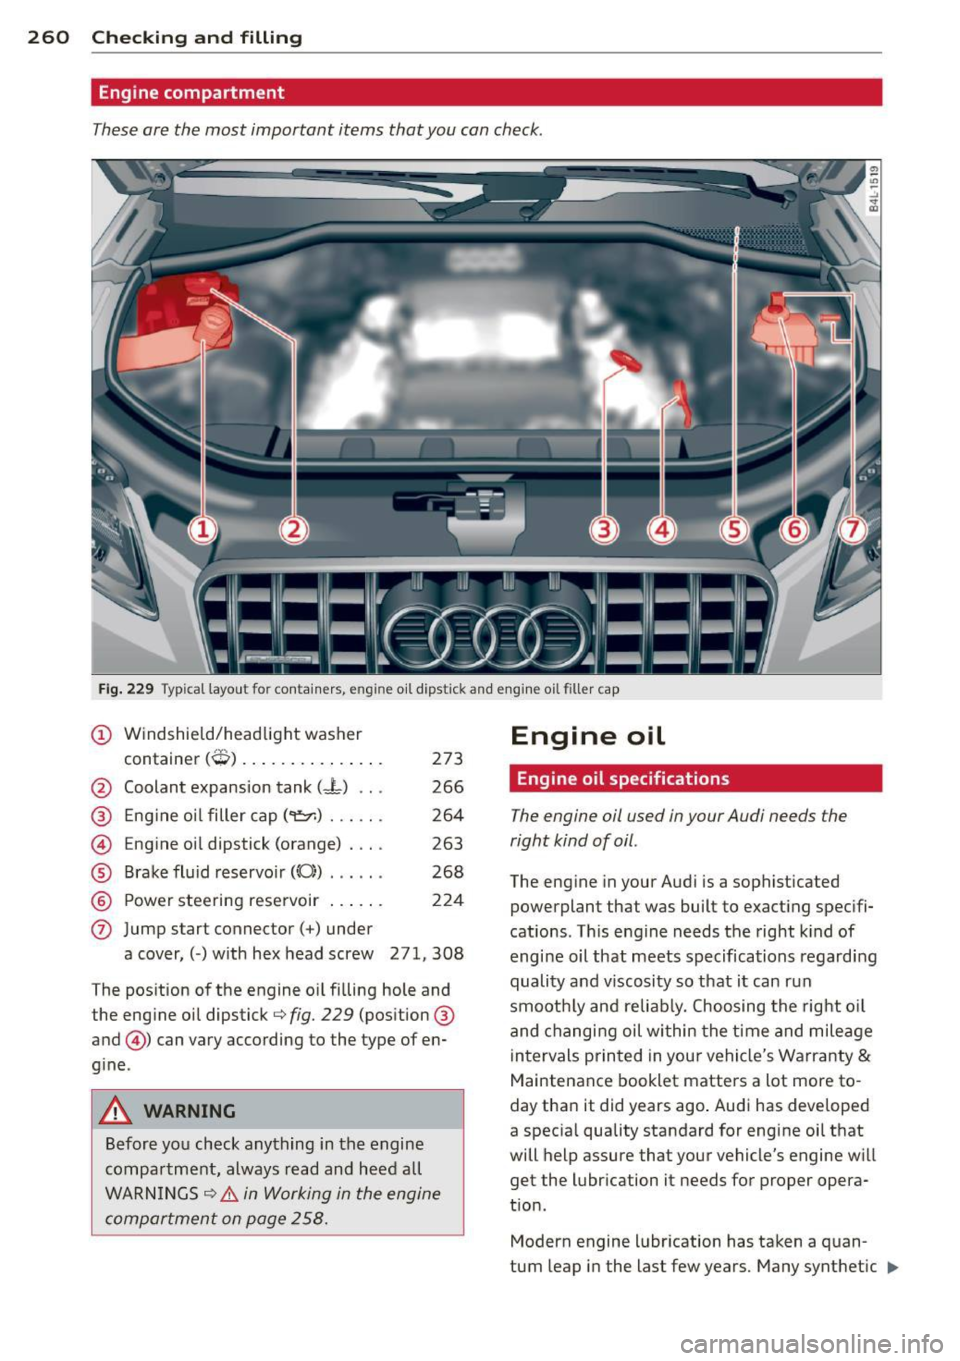 AUDI Q7 2012  Owner´s Manual 260  Checking  and  filling 
Engine  compartment 
These are the  most  important  items  that  you  can check . 
Fig. 229 Typical layout  for  containers,  engine oil  di pstick  and engin e oil  fill